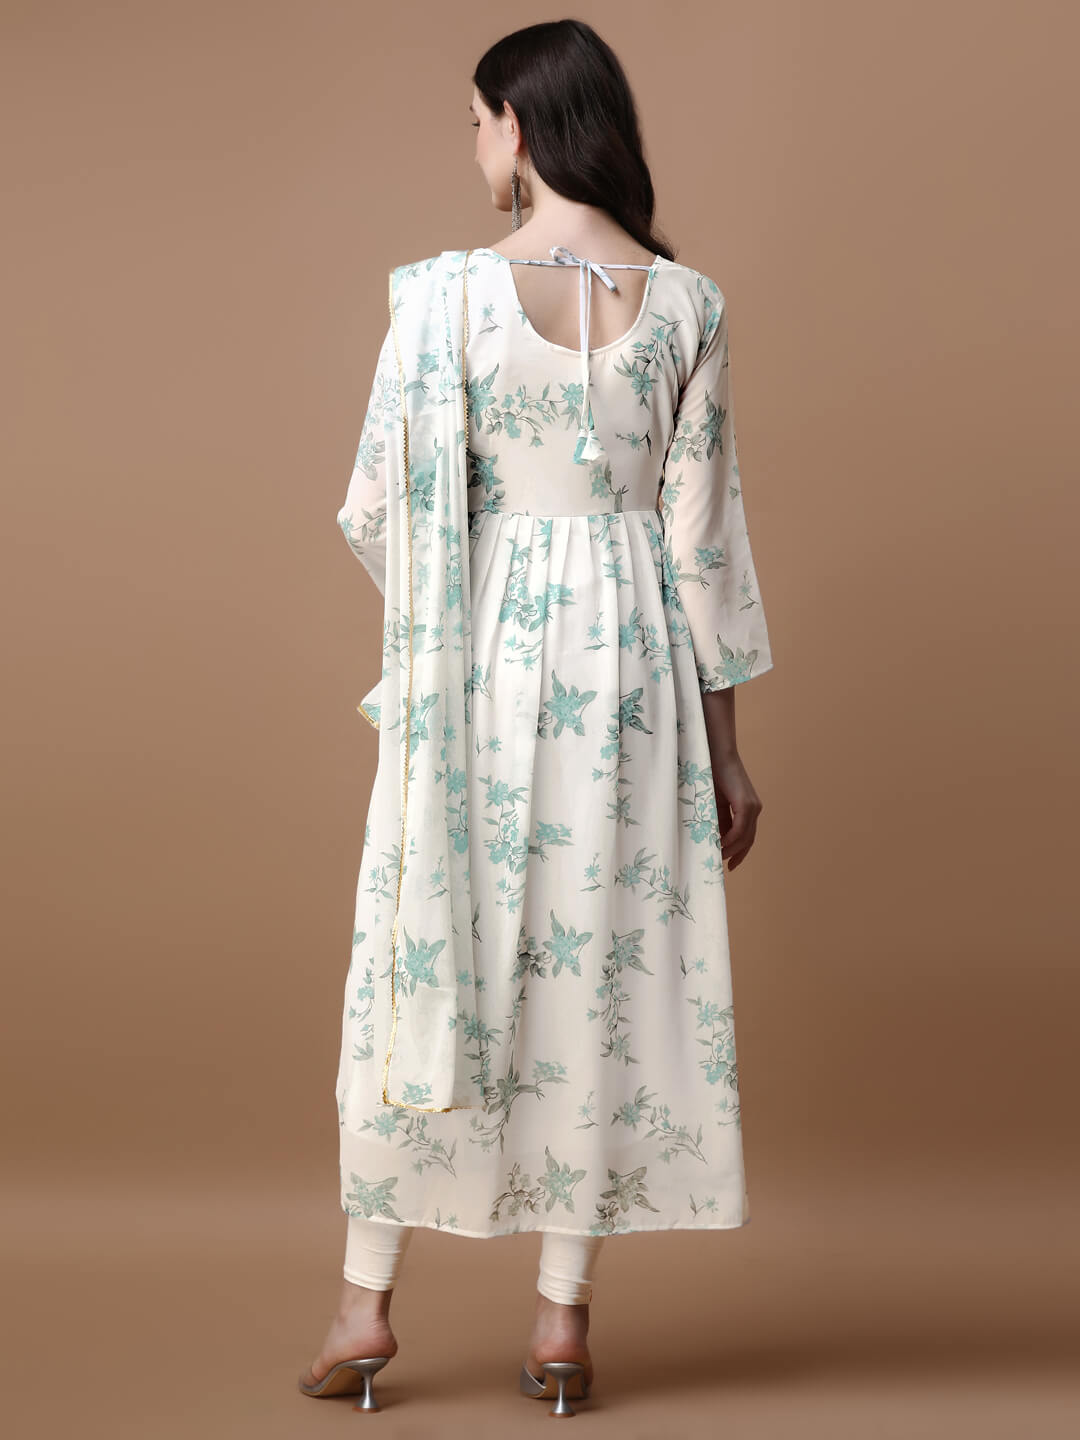 Printed Georgette Calf Length Floral Summer Dress With Dupatta - thevendorvilla